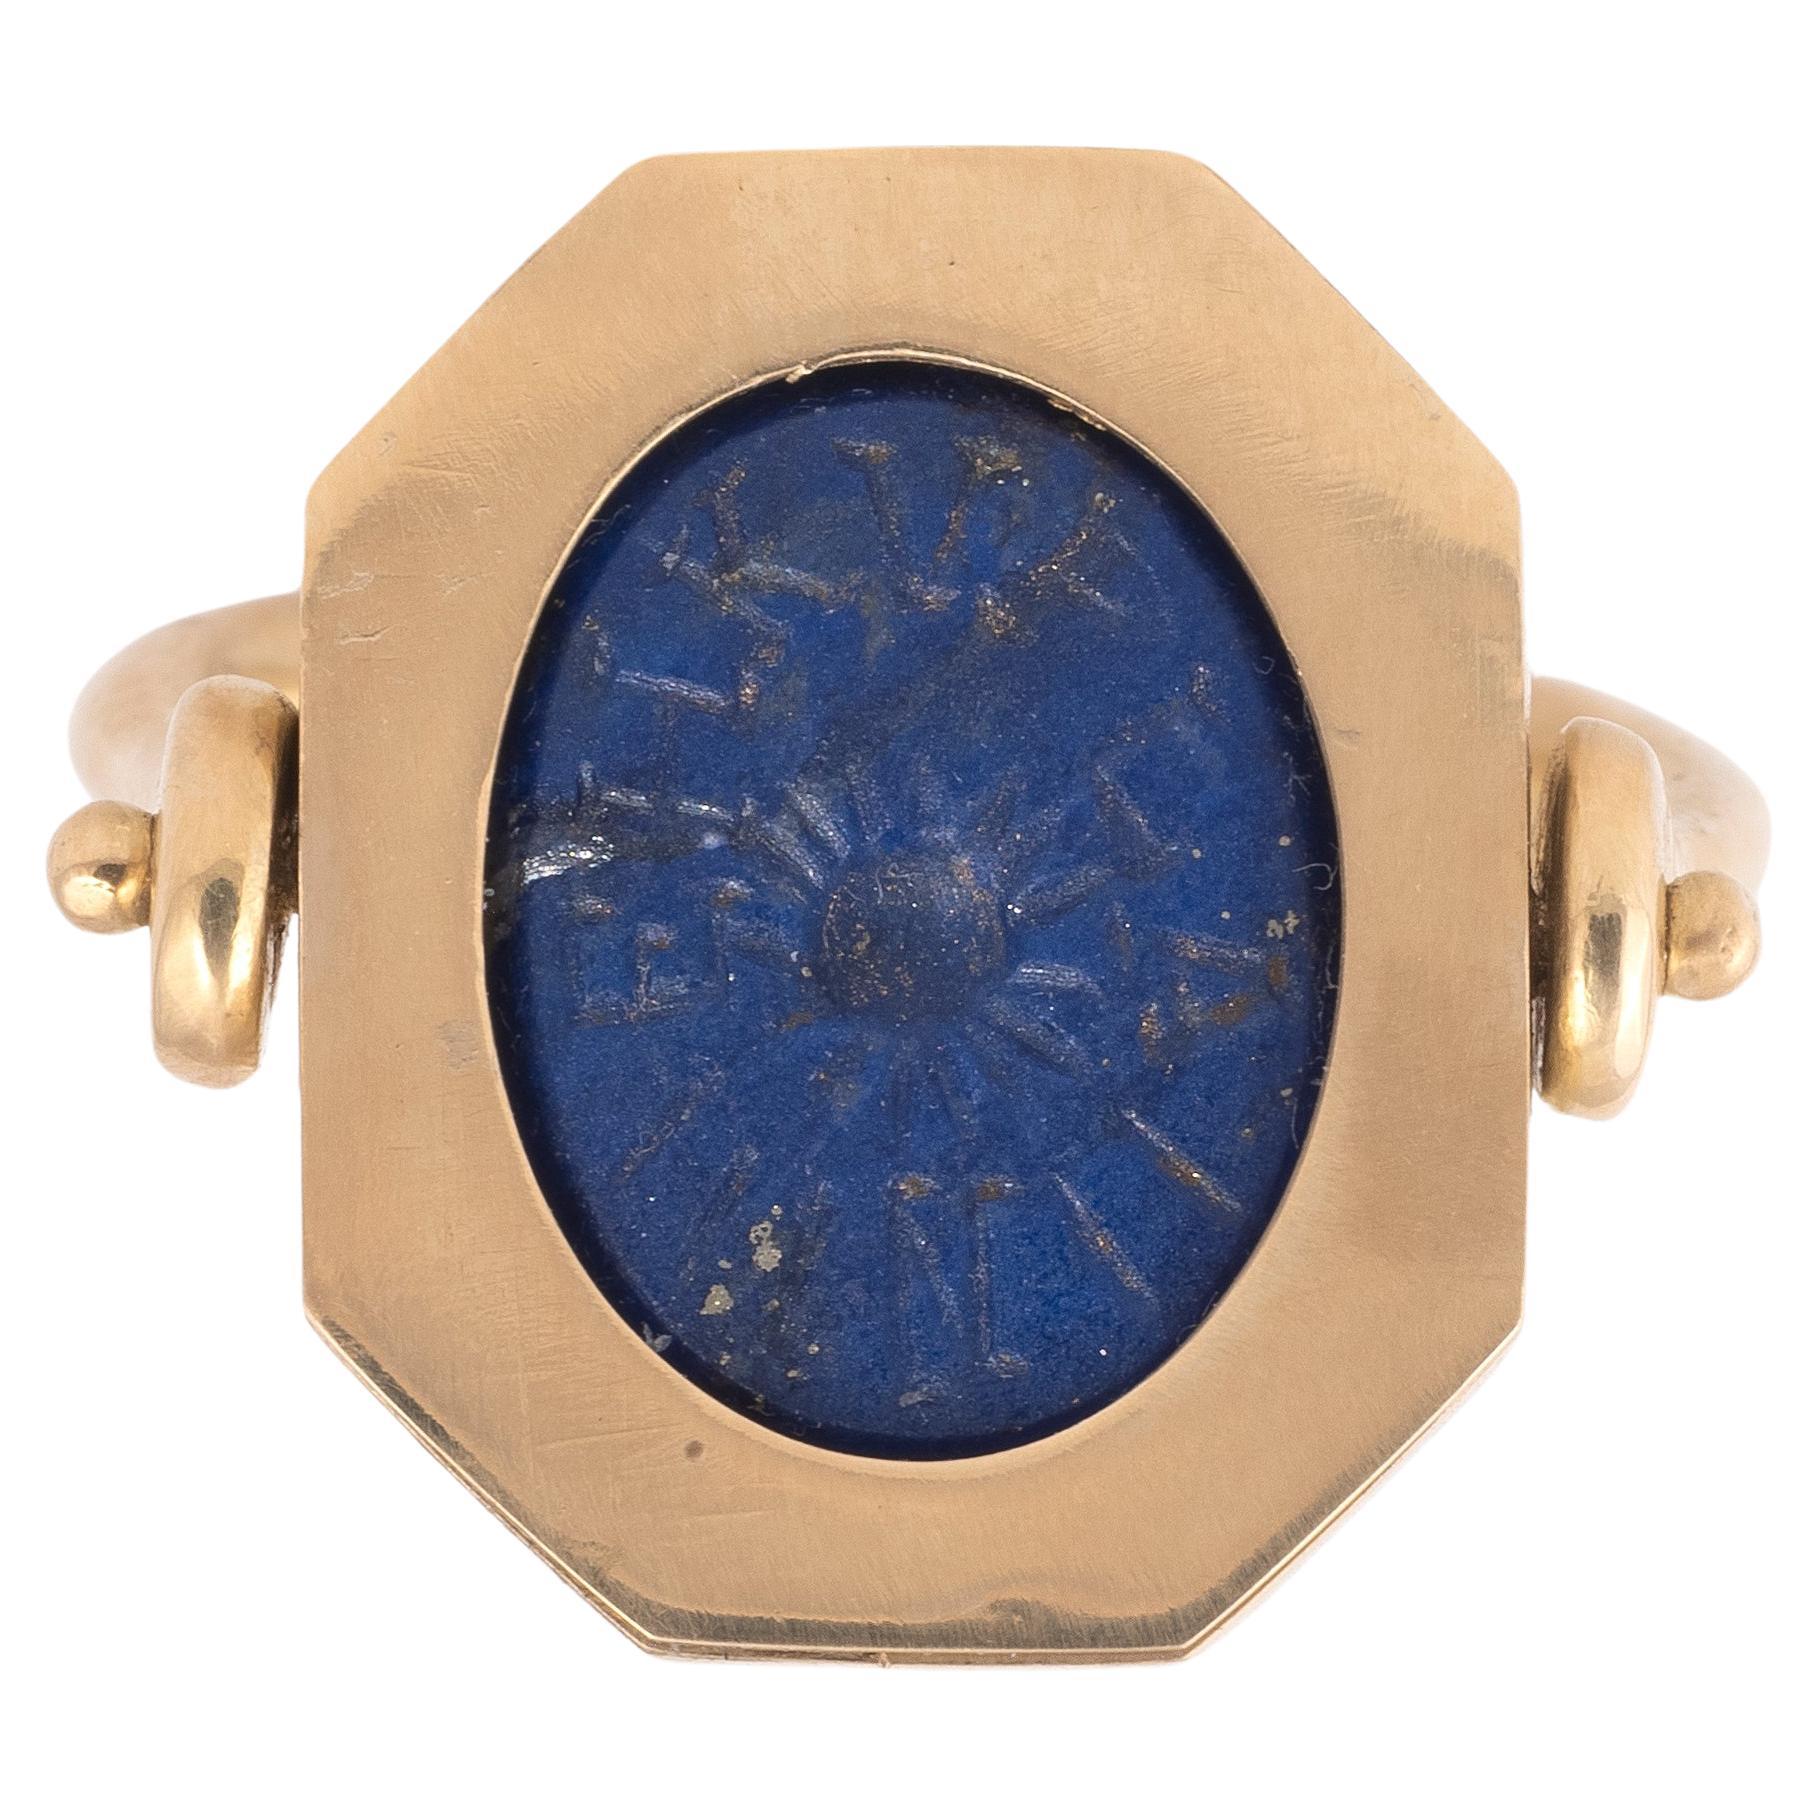 Ring in 18kt yellow gold a lapis lazuli abraxas with double sided magical inscription, III-IV century AD with a pivoting octagonal bezel.
Group of roman magic intaglios. 3nd - 4rd century AD for the intaglio.
Dimensions of the intaglio: 16mm x